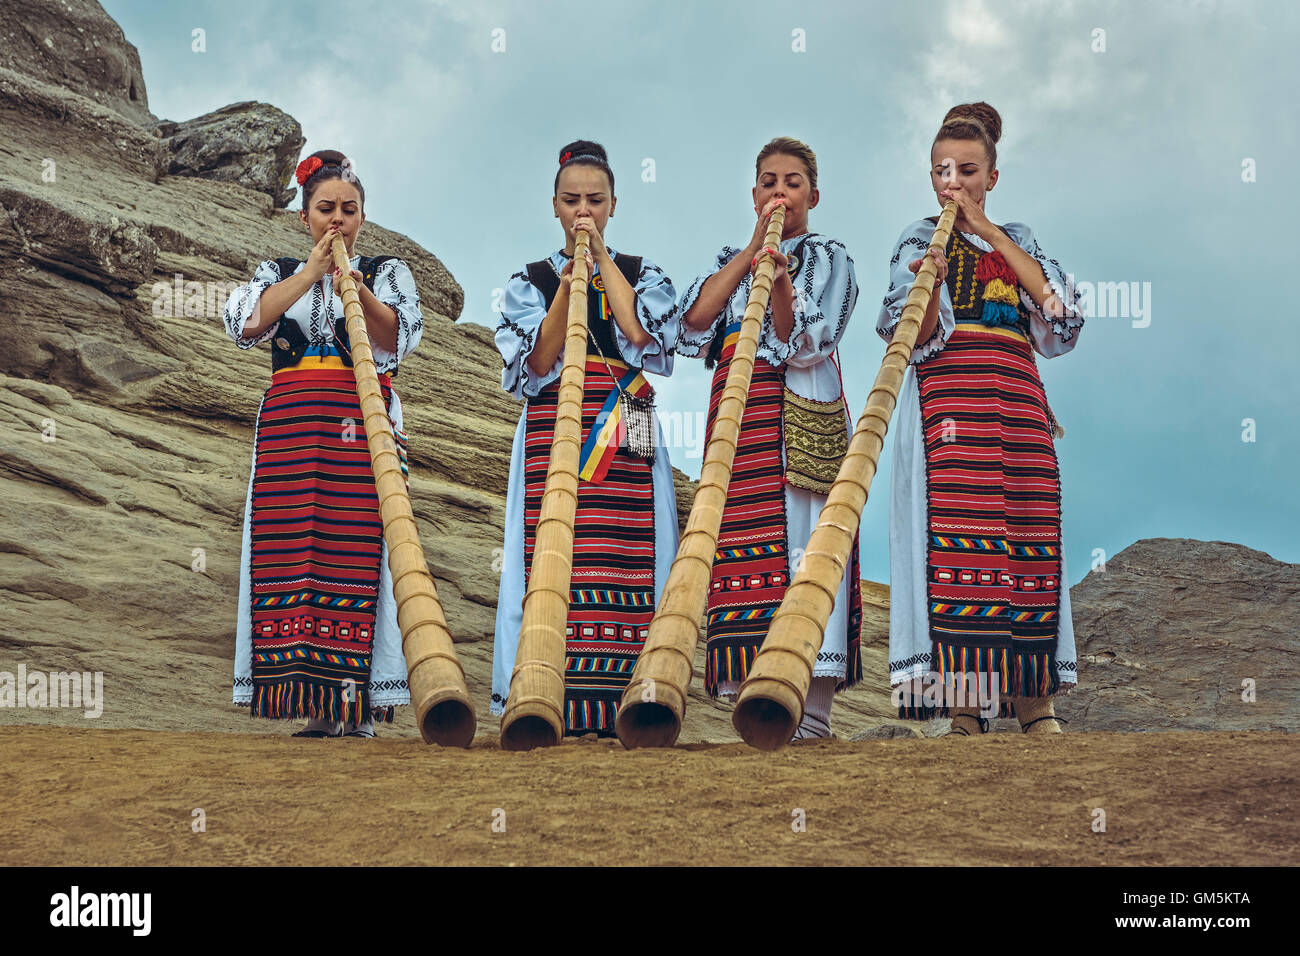 Bucegi Mountains, Romania - August 6, 2016: Group of Romanian female tulnic players dressed in colorful traditional costumes Stock Photo